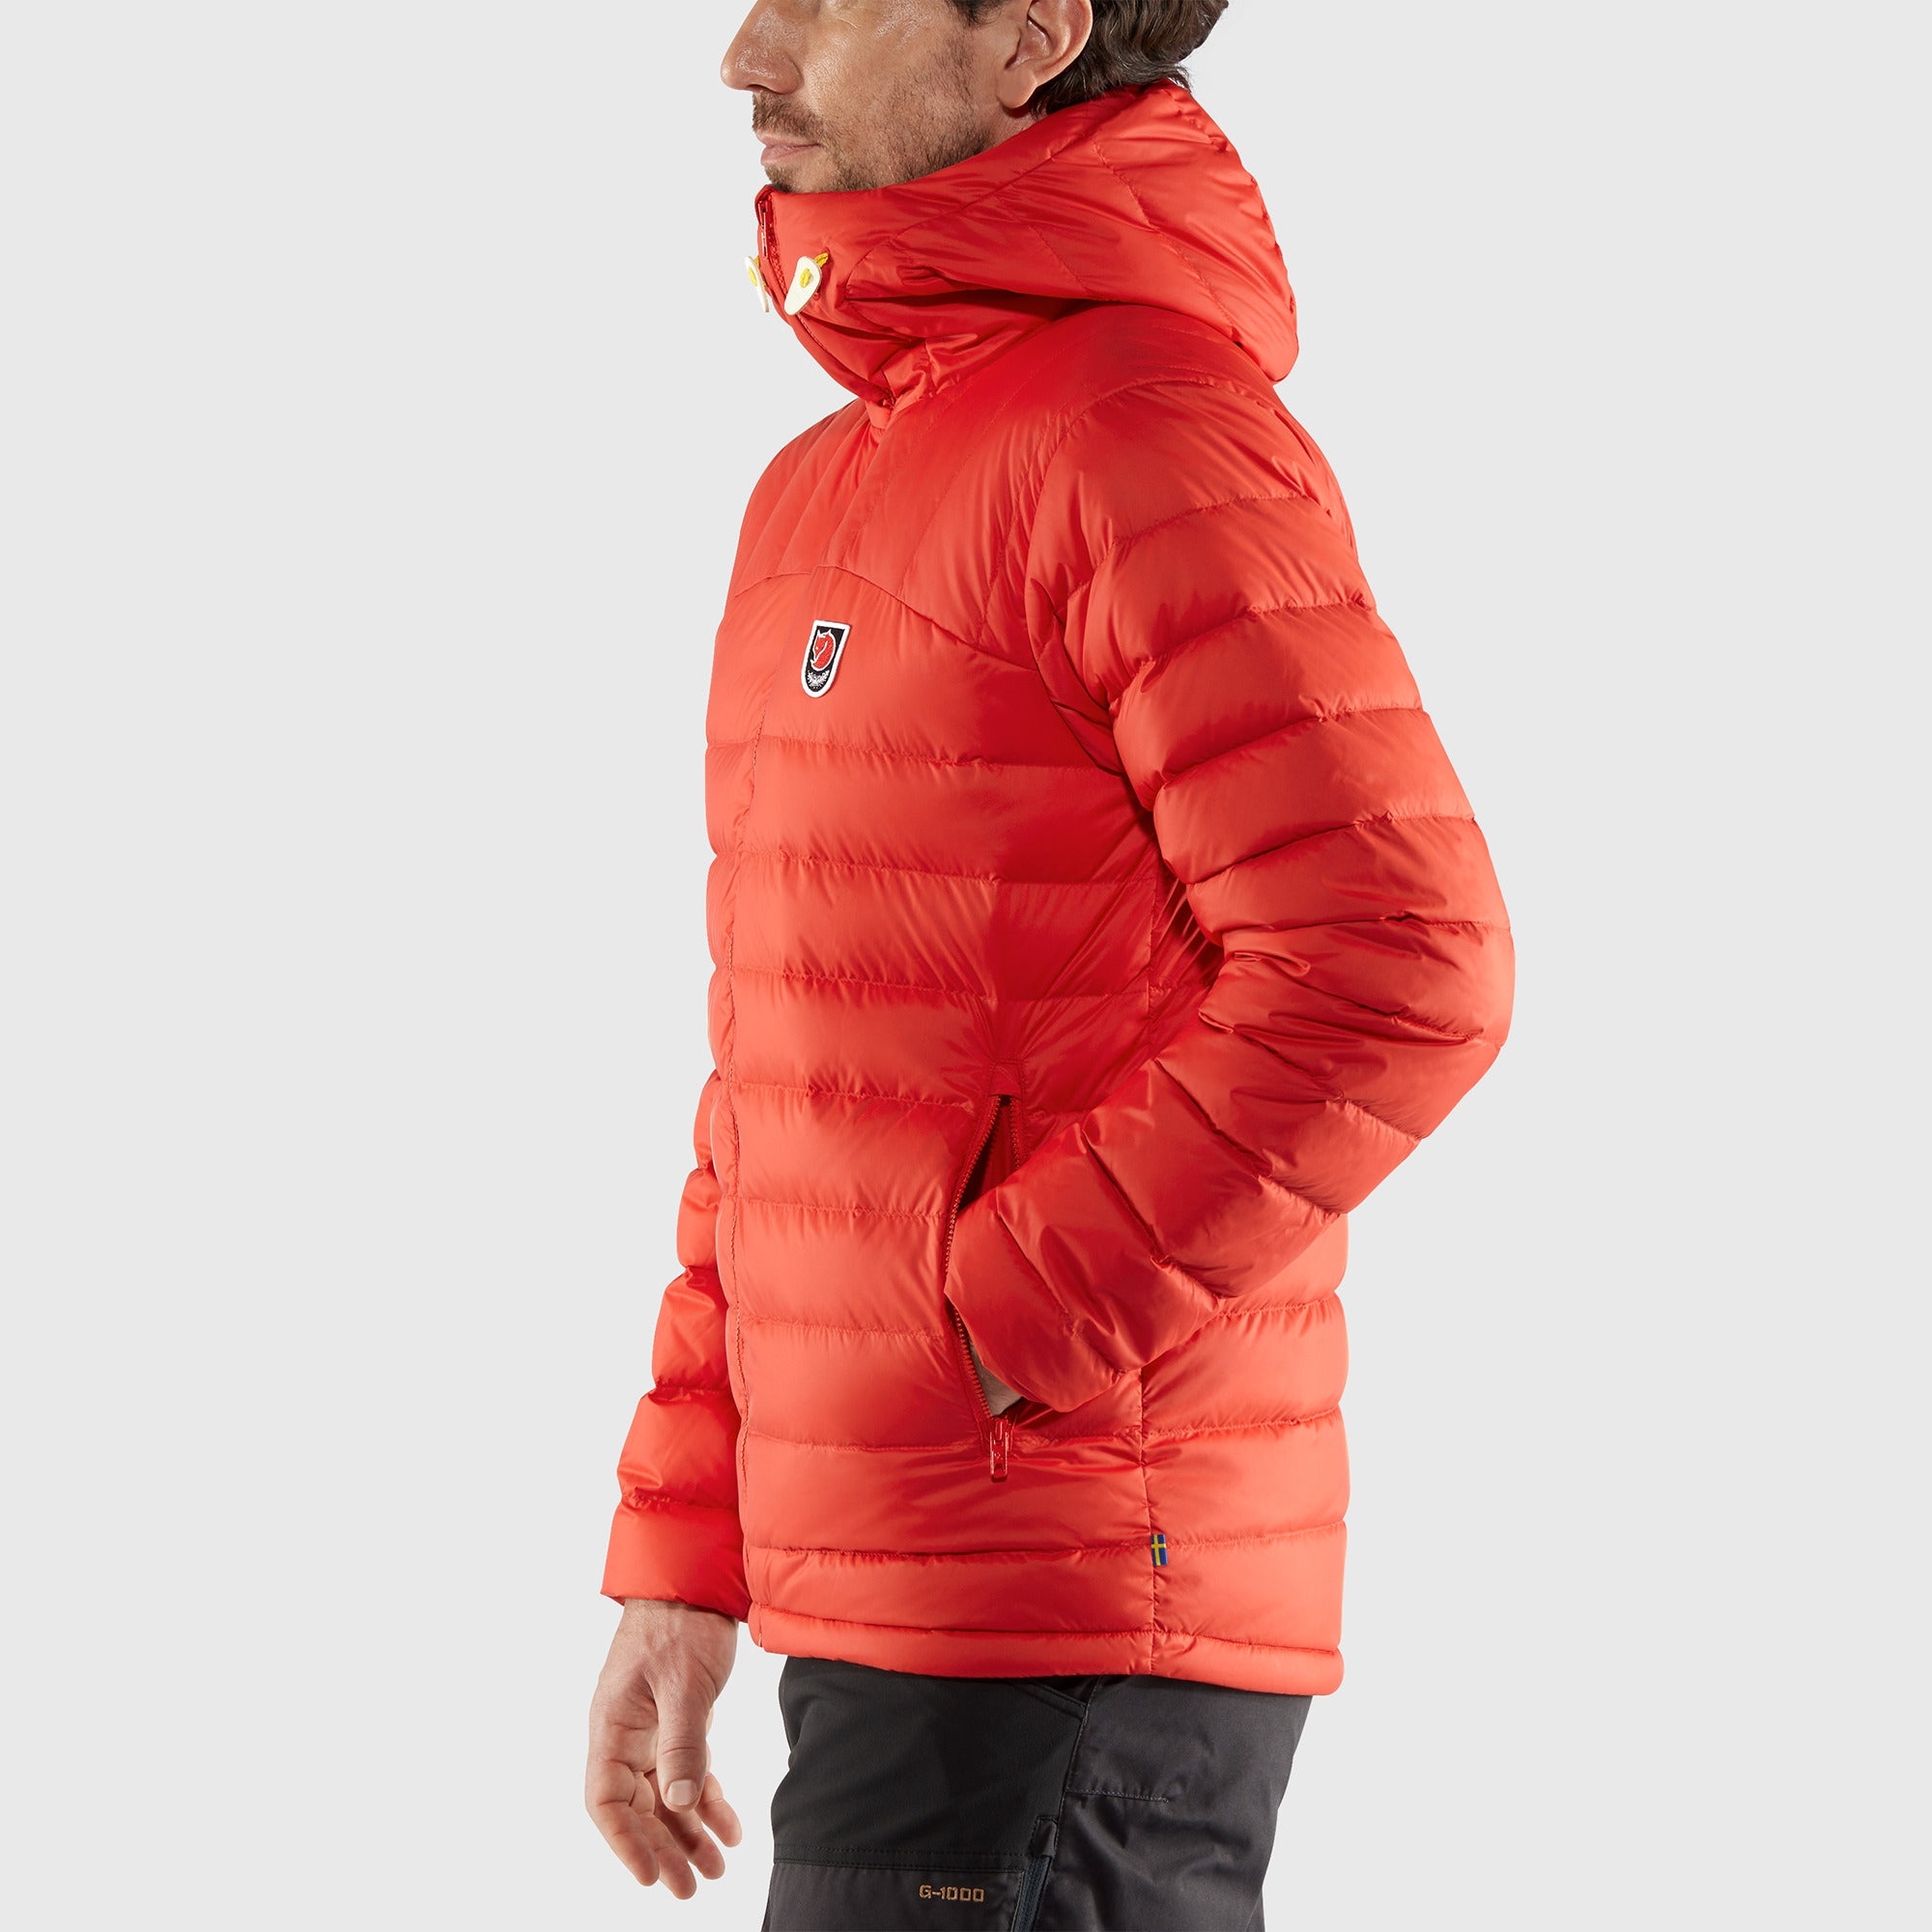 Fjallraven Men's Expedition Pack Down Hoody Jacket